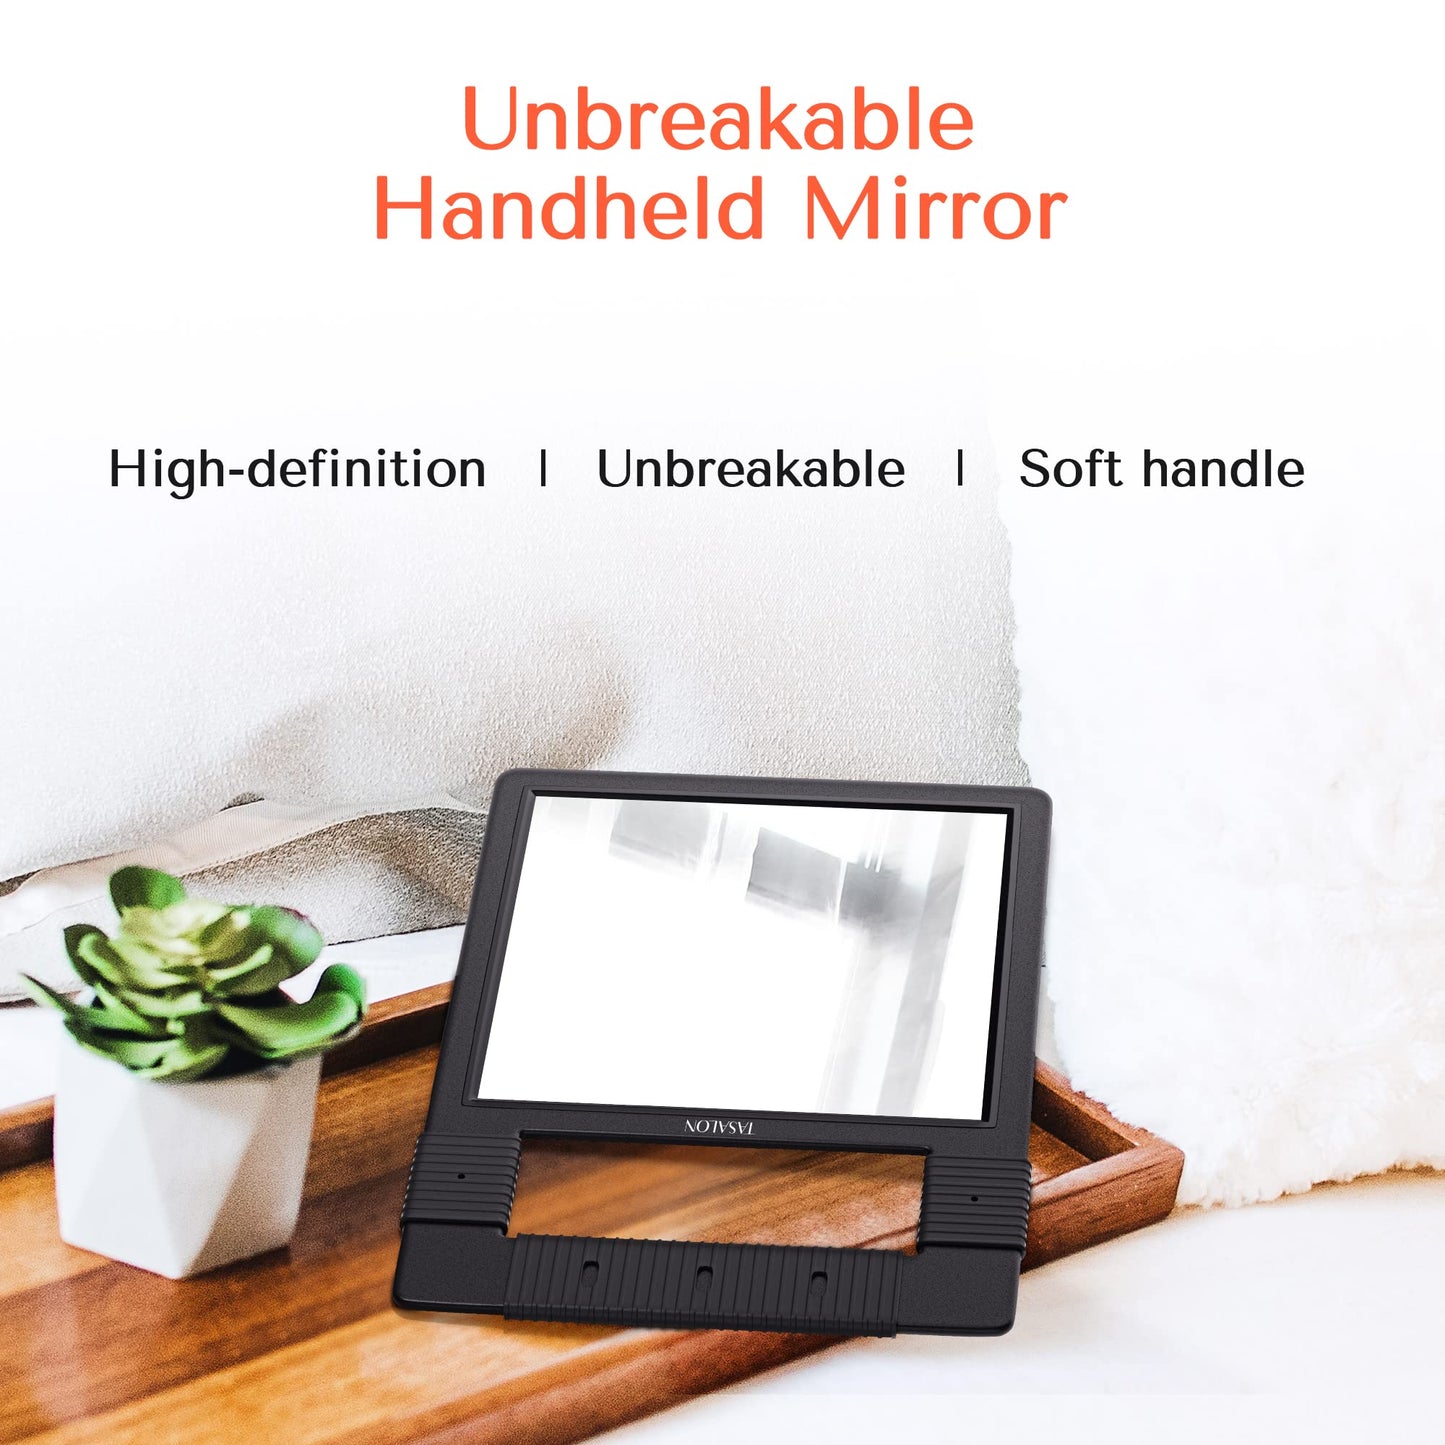 TASALON Hand Mirrors with Handle - Unbreakable Hand Mirror - Unbreakable Handheld Mirror with Silicone Handle for Barber Mirror, Salon Mirror, Makeup Mirror or Shower Mirror, Hand Held Mirror - Black